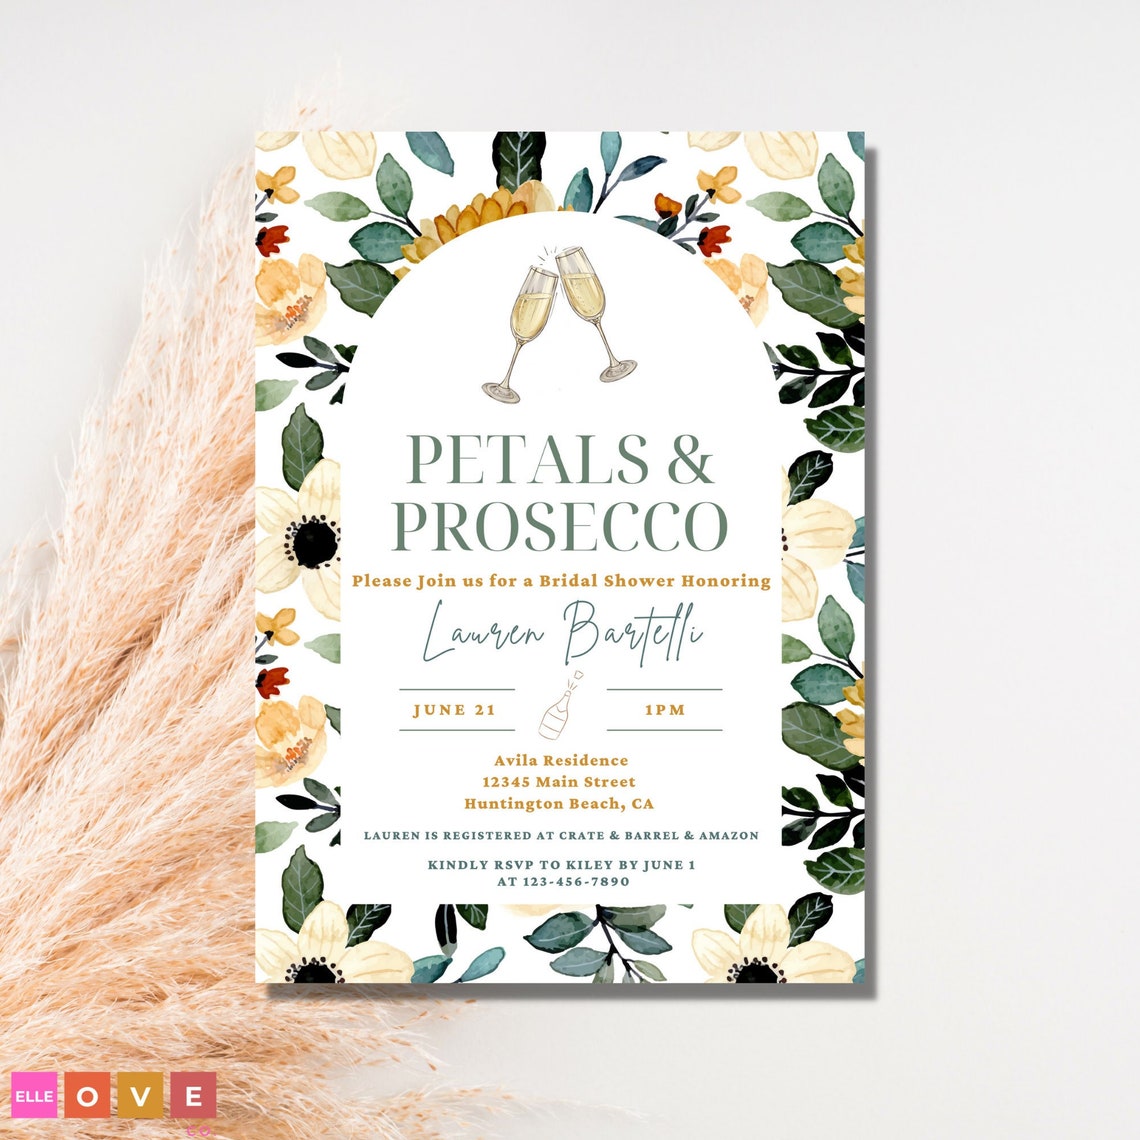 Petals and Prosecco Bridal Shower Invitation Wine and Floral - Etsy